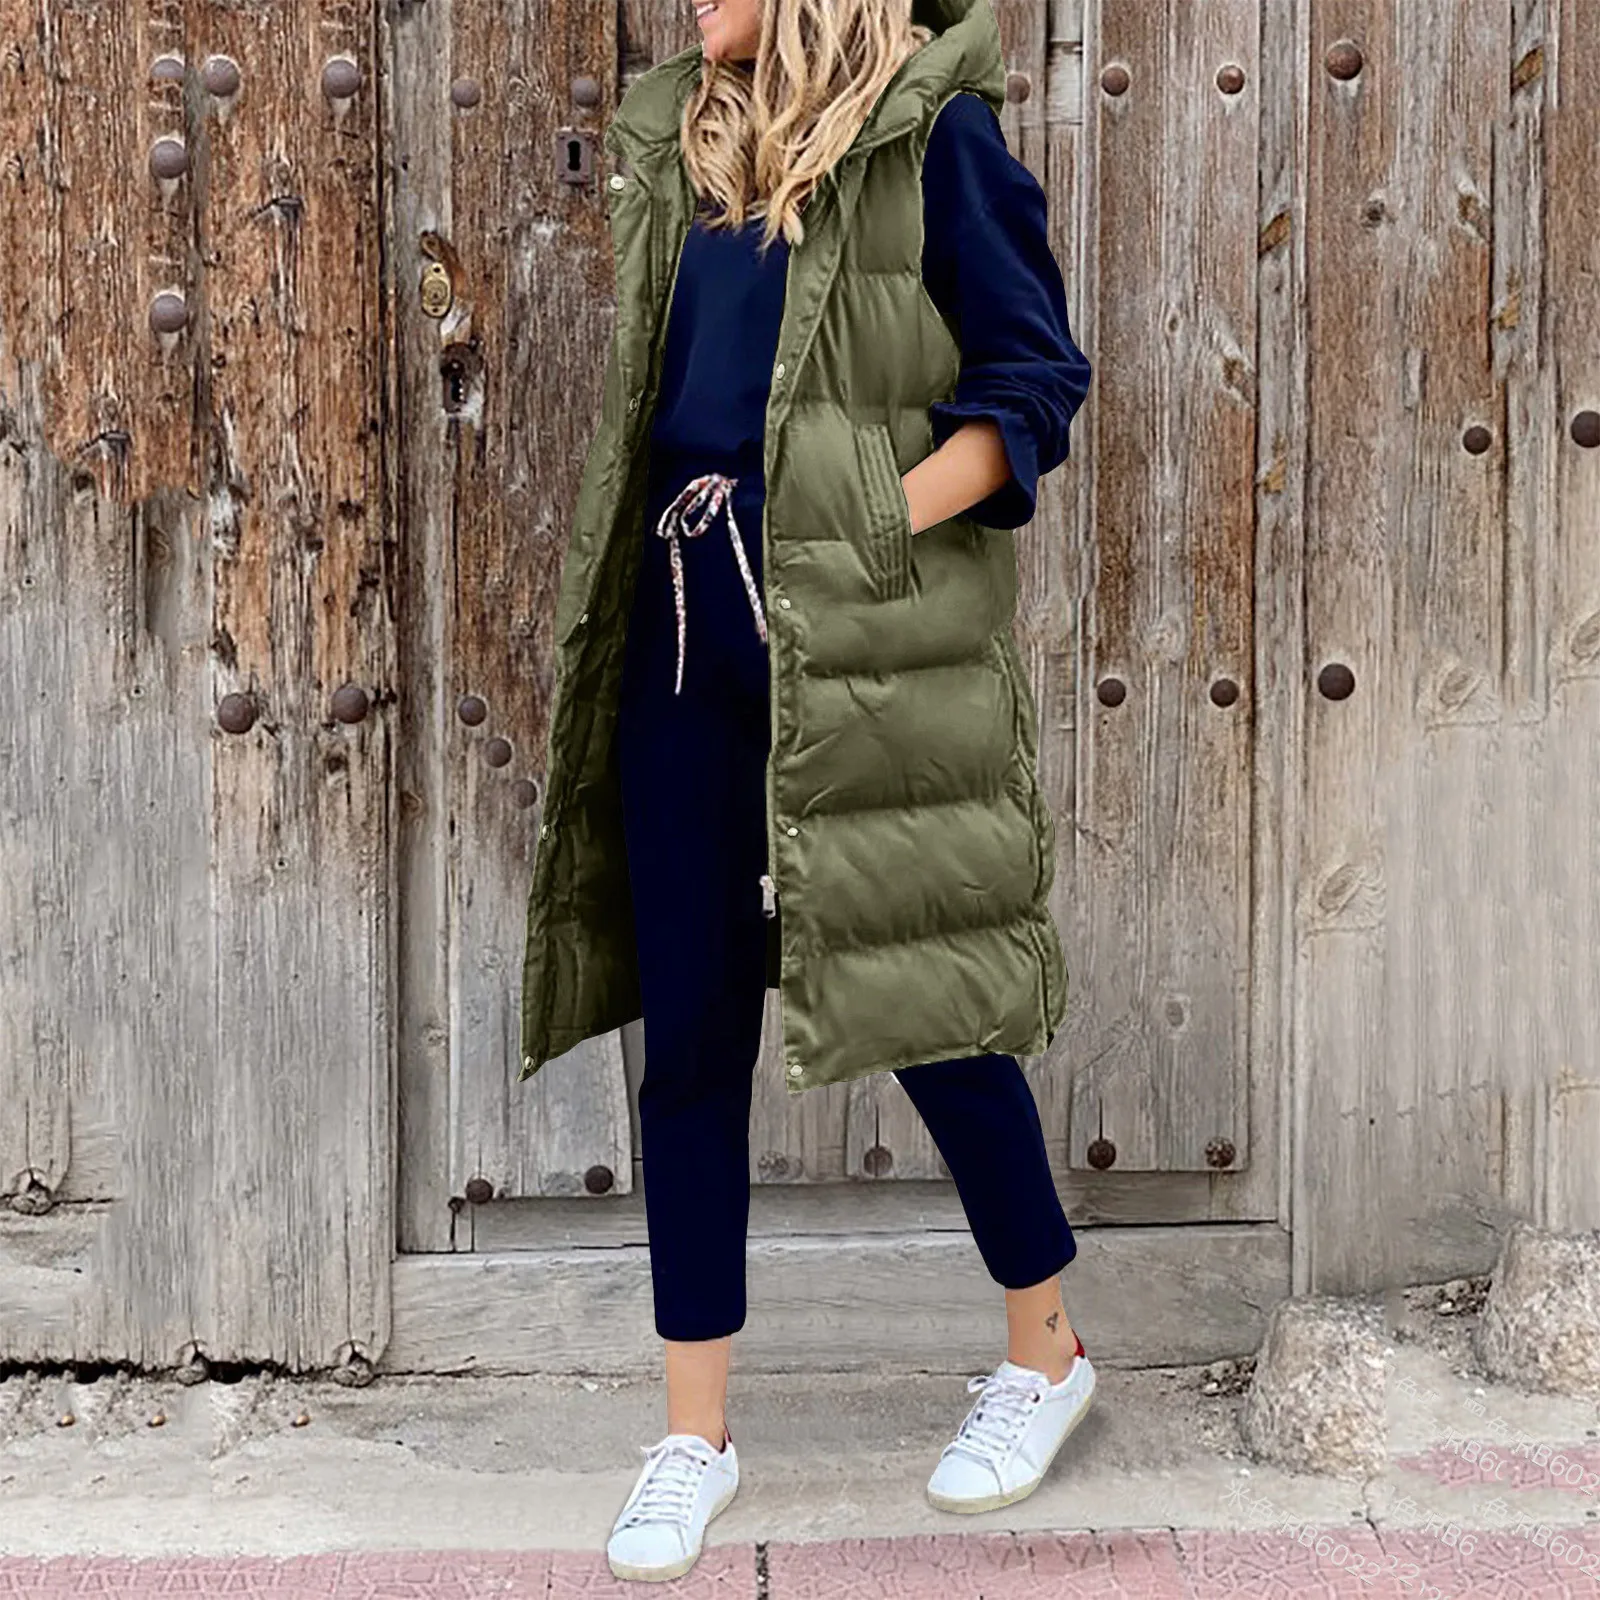 EMMA Women’s Winter Cosy Warm Down Hooded Vest Jacket Quilted Zip Cotton Padded Gilet Lightweight Loose High Neck Sleeveless Outwear Waistcoat Plus Size 